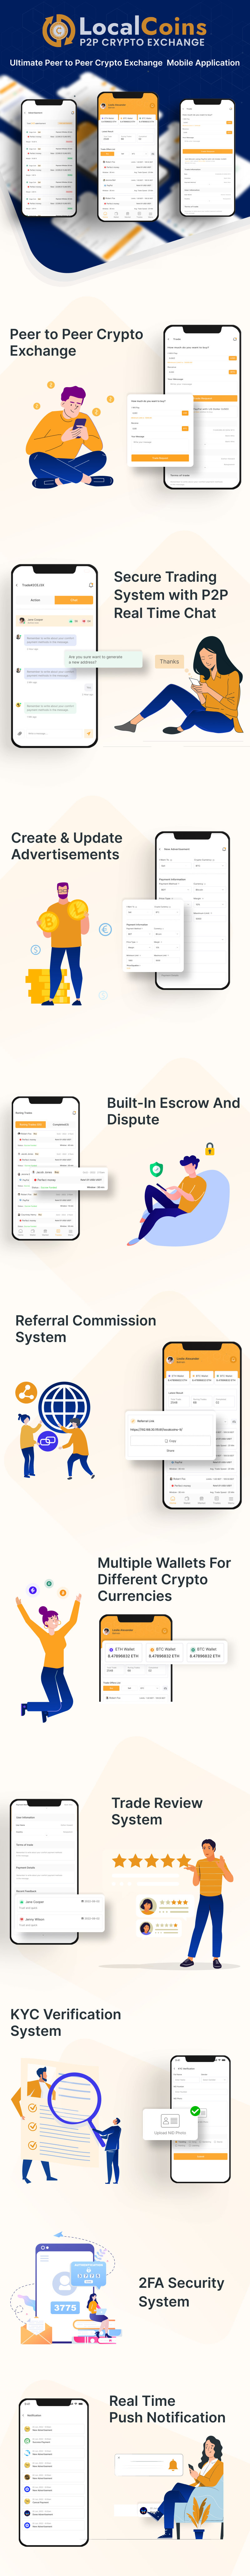 LocalCoins - Ultimate Peer To Peer Crypto Exchange Mobile Application - 3